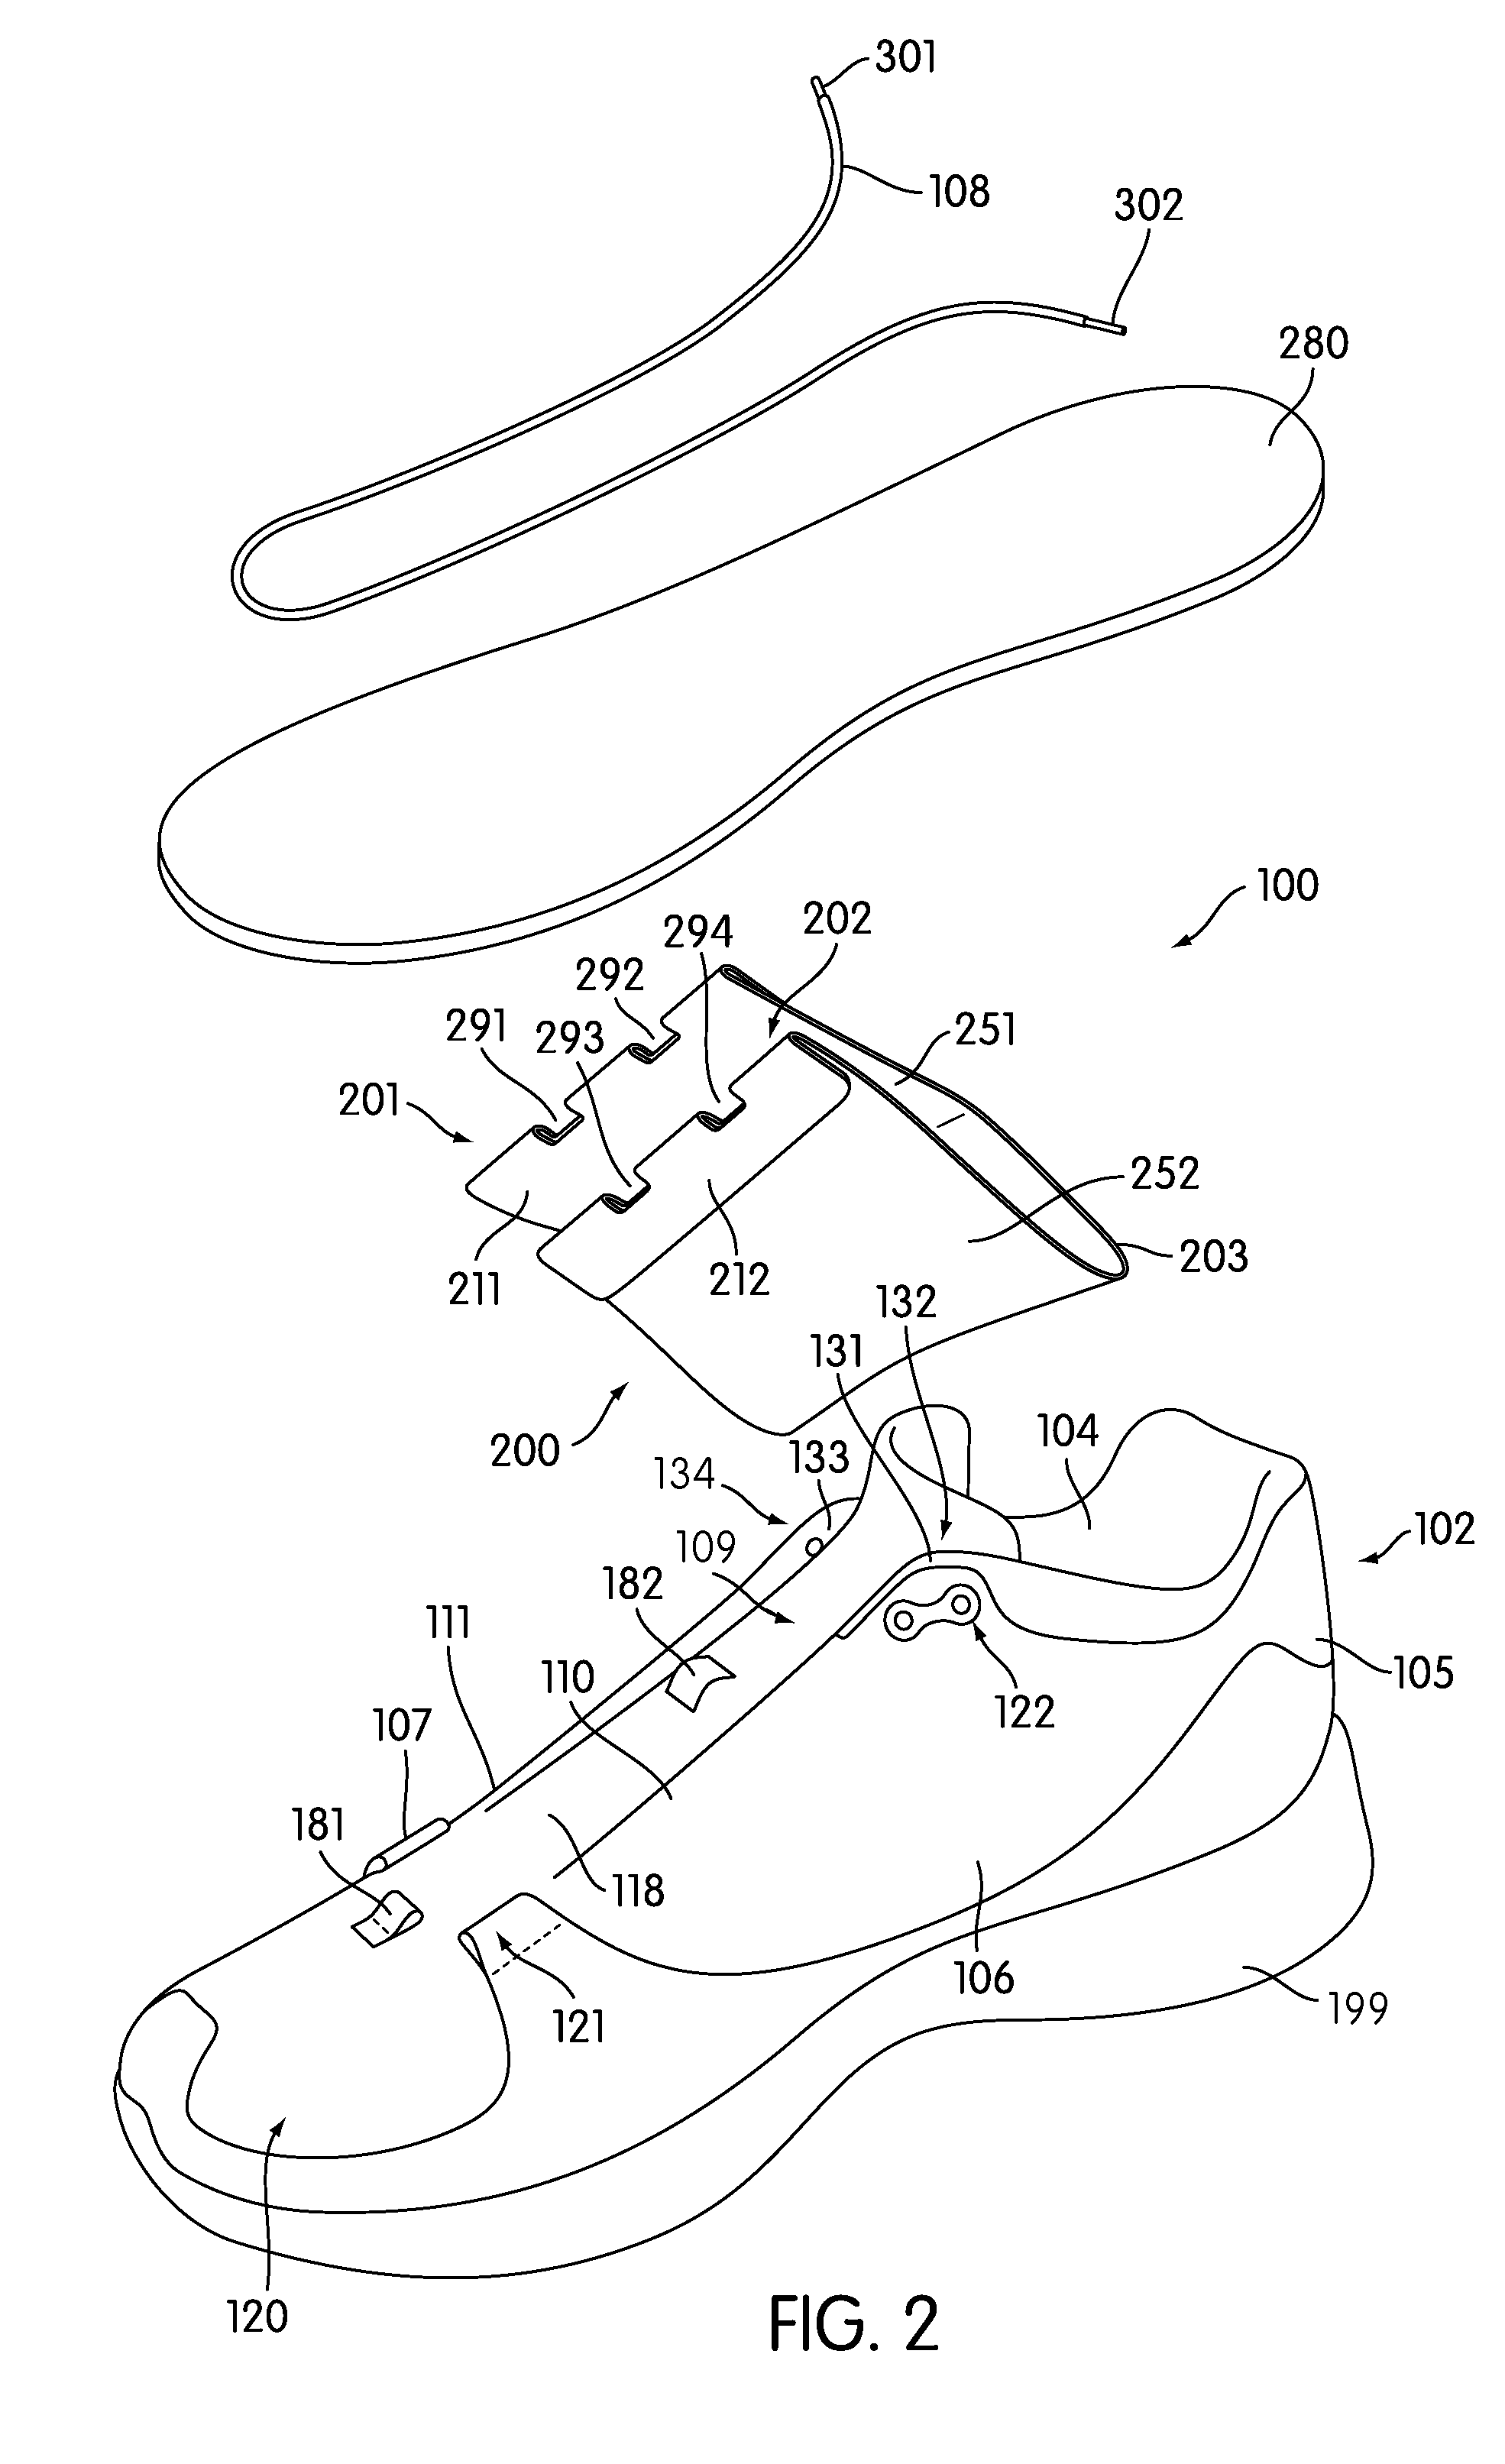 Article of Footwear with Integrated Arch Strap